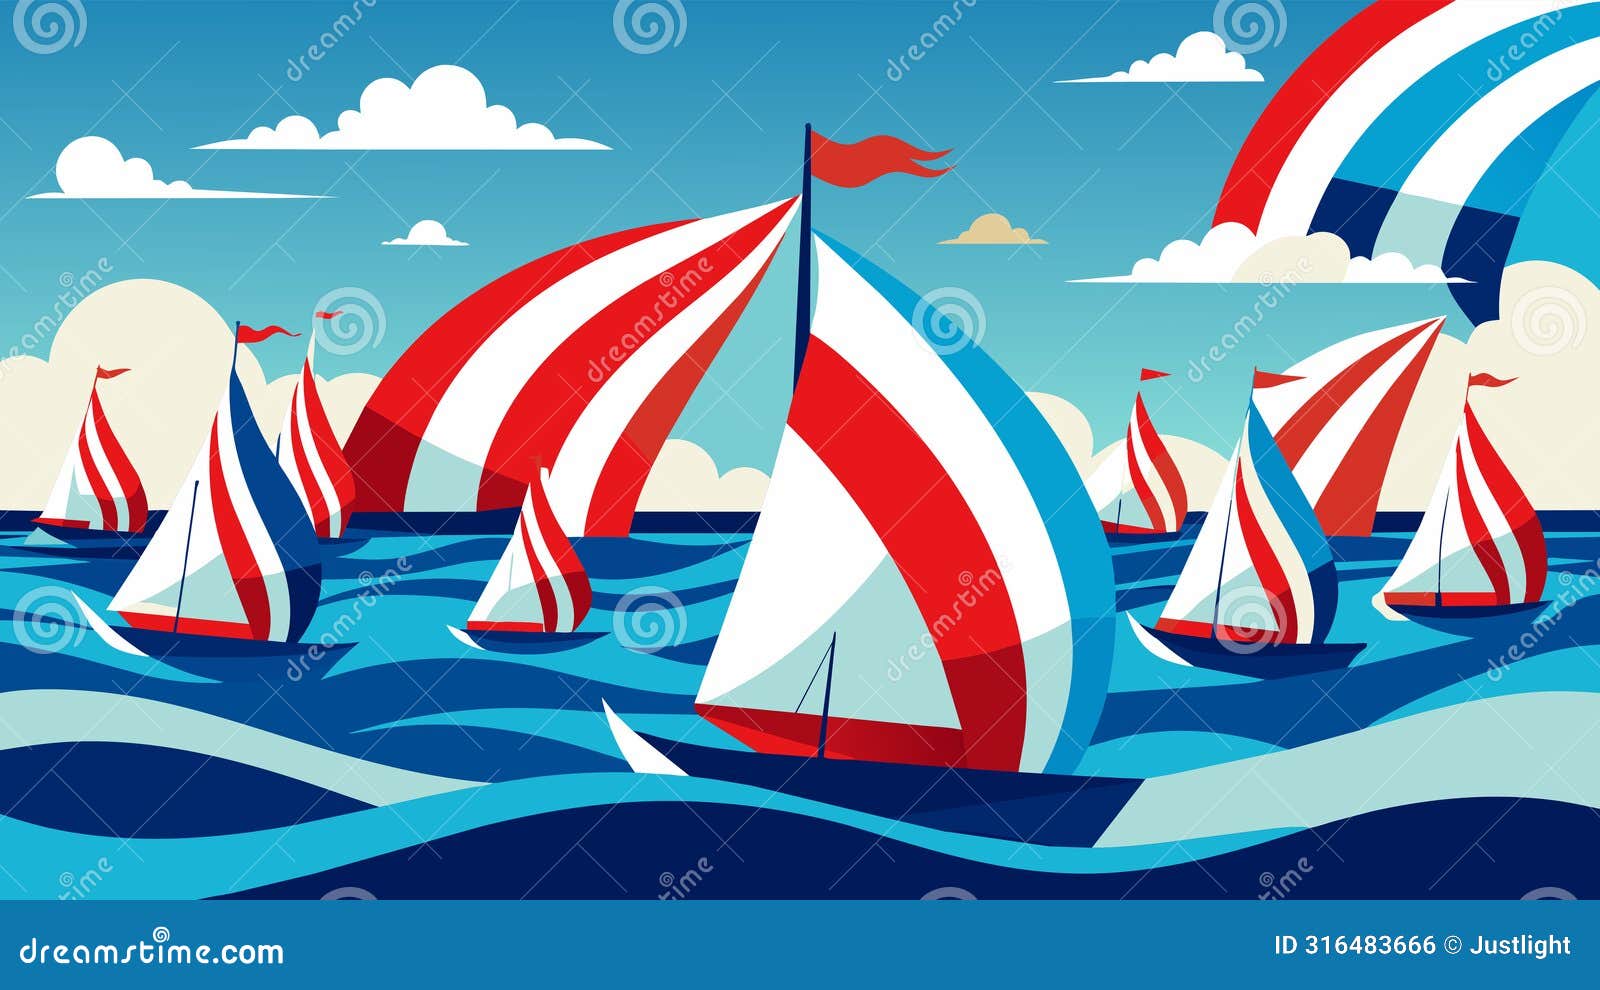 amidst the sparkling waves a regatta of sailboats decked out in red white and blue glide by showcasing the pride we have